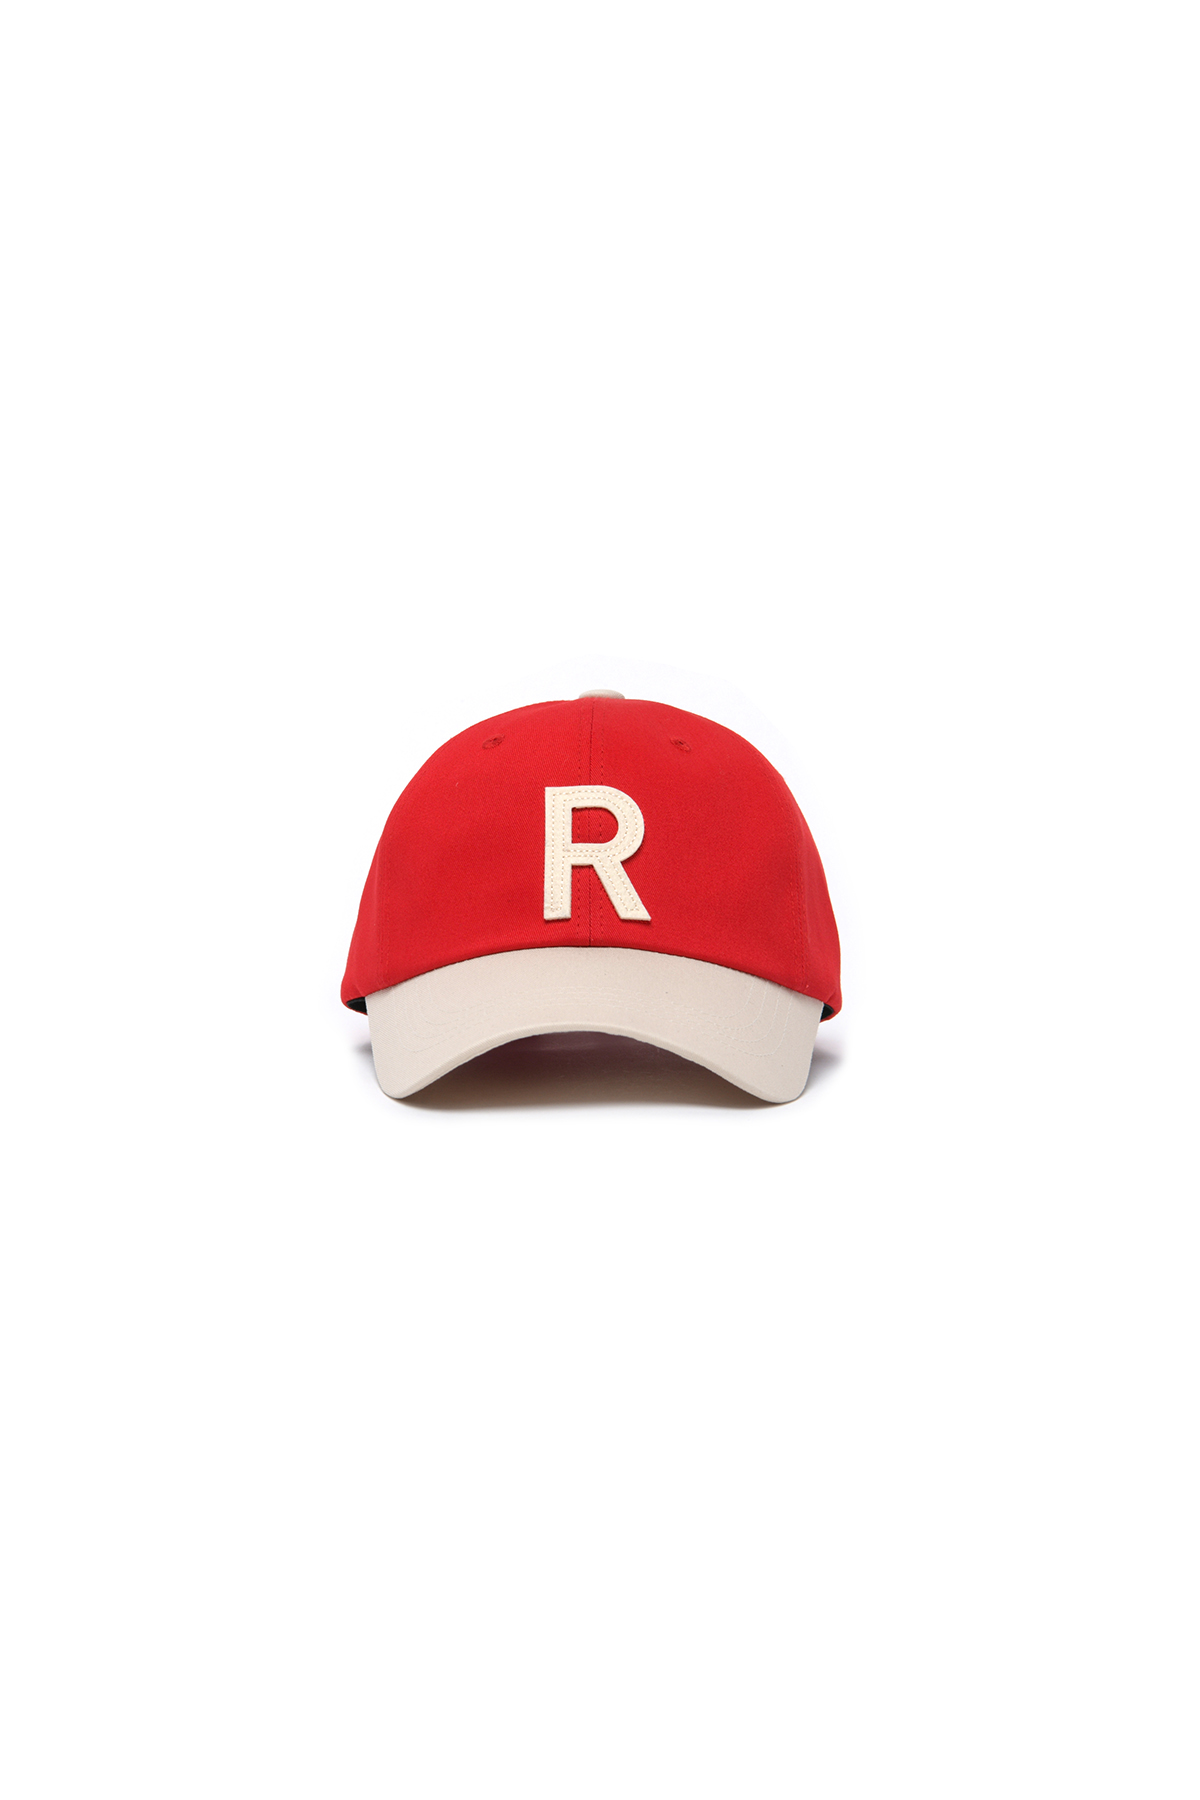 R PATCH BALL CAP IVORY/RED